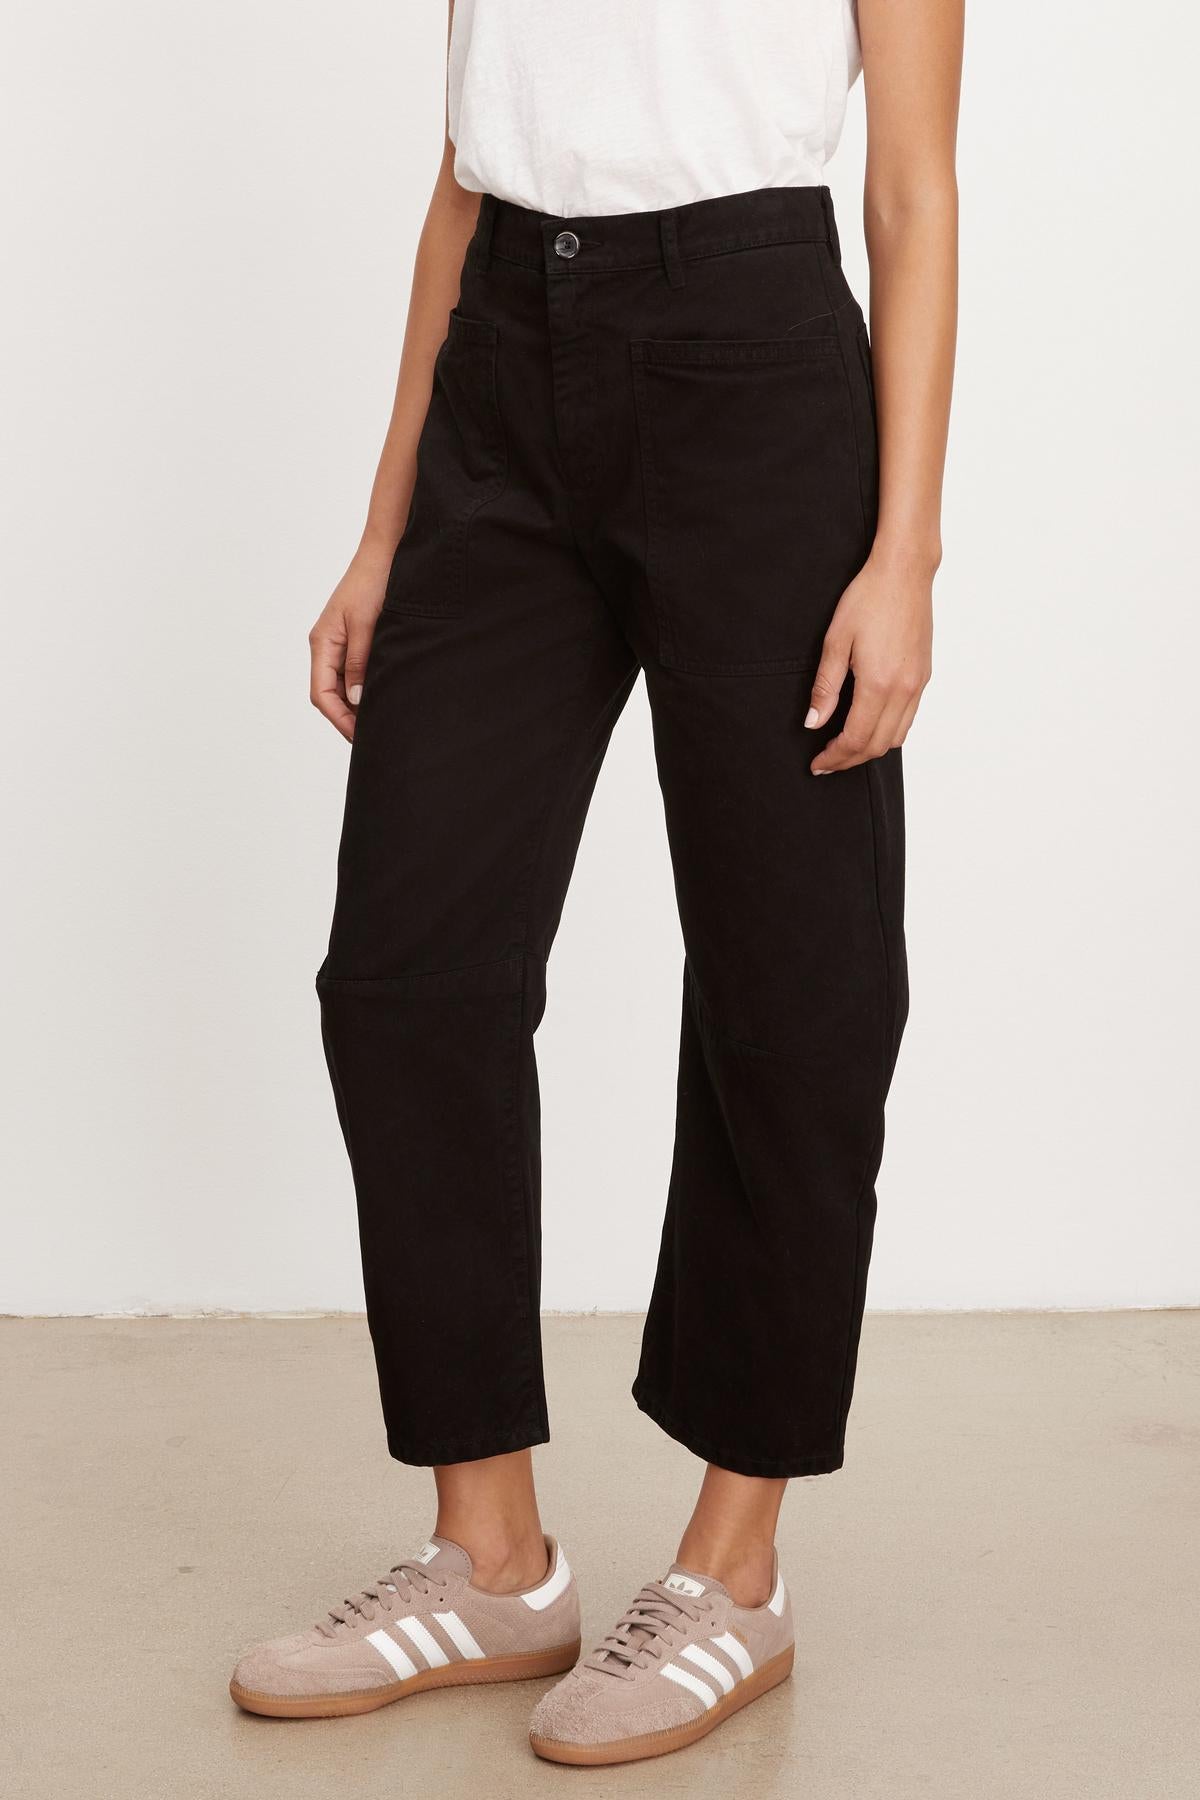 A woman wearing Velvet by Graham & Spencer's BRYLIE SANDED TWILL UTILITY PANT cropped pants and a white t-shirt.-35955673727169